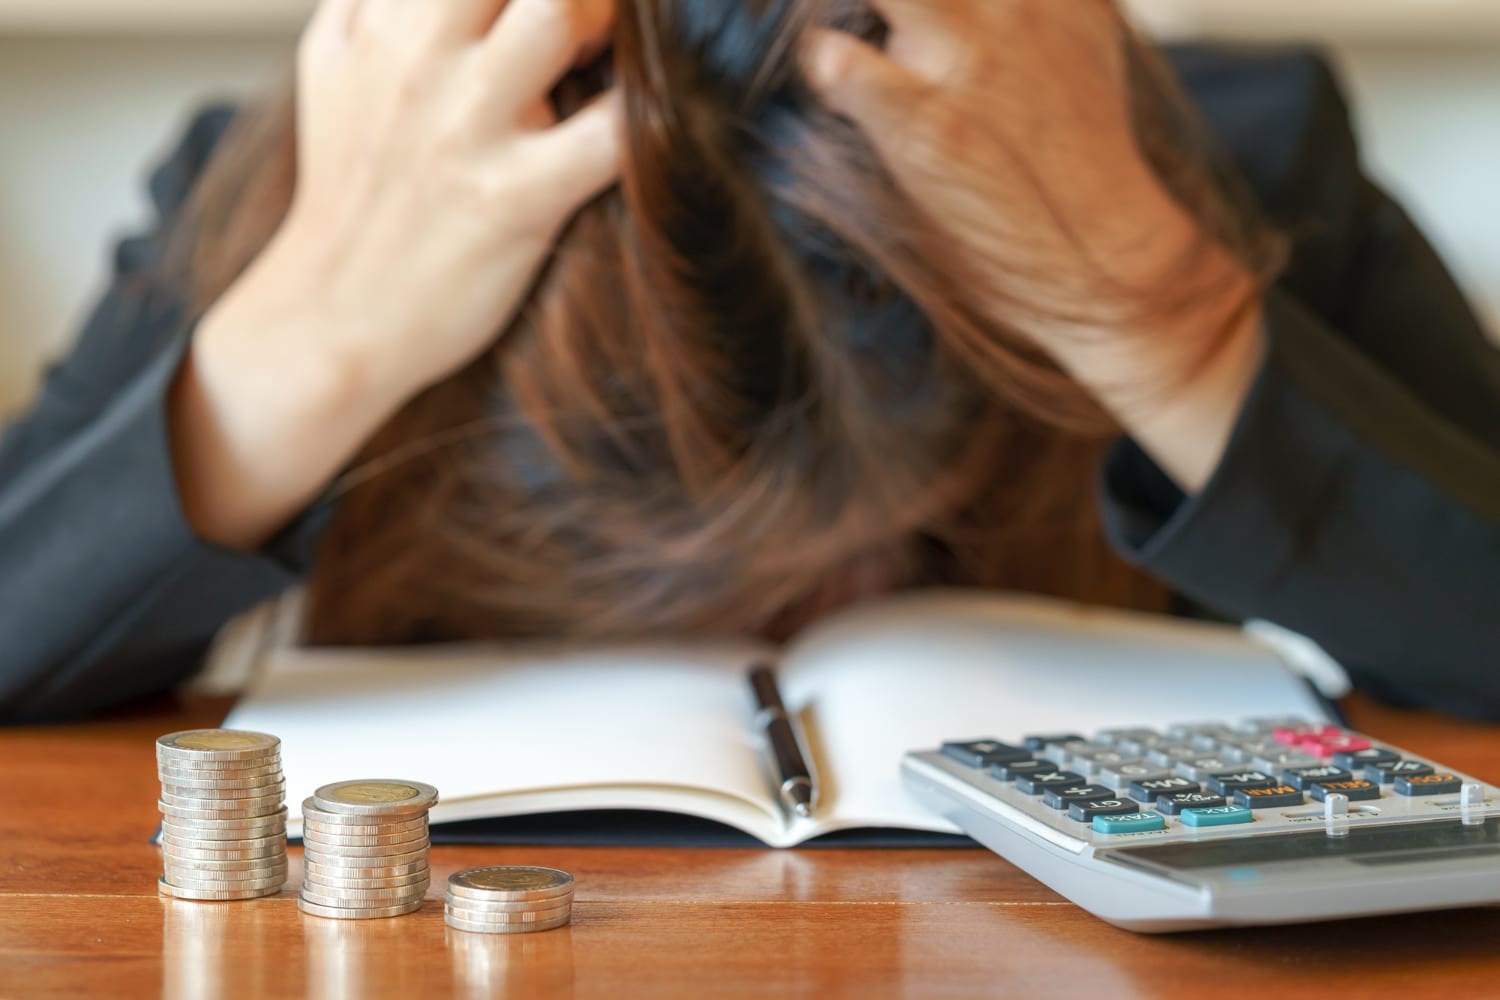 stressed business woman running out money stock market down